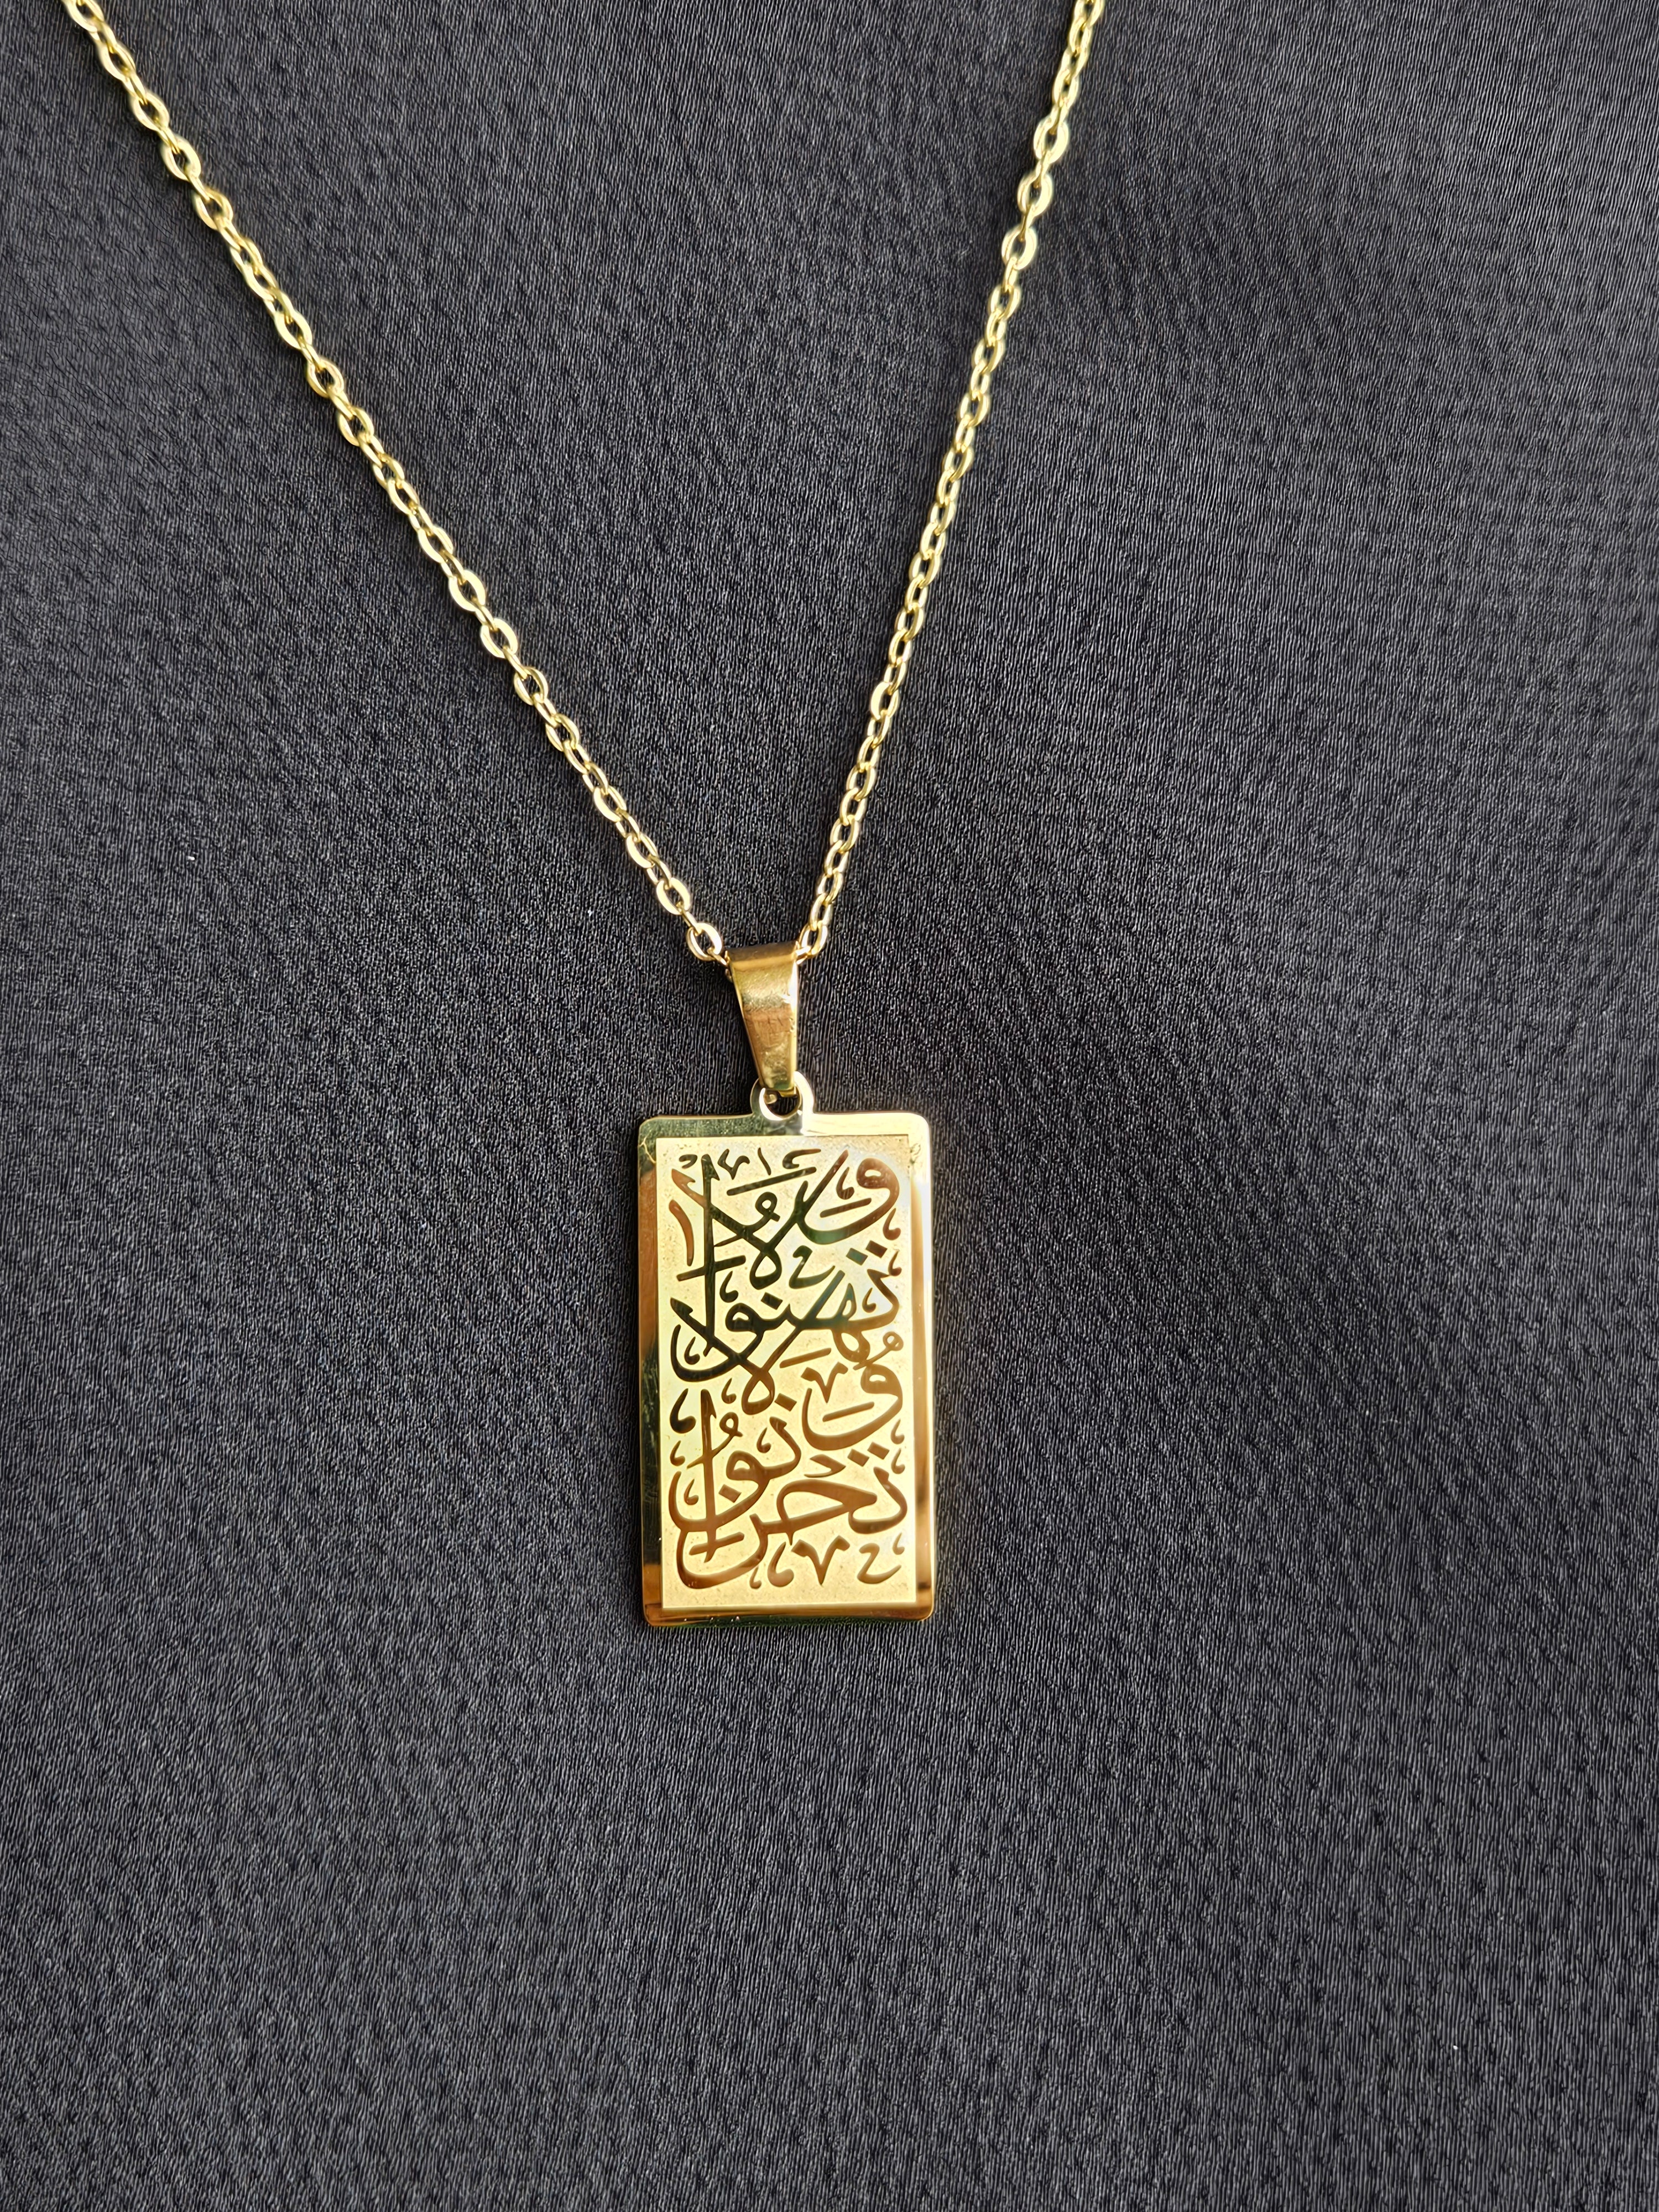 "Don't Lose Hope or Be Sad" Arabic Calligraphy Necklace - Habibi Heritage